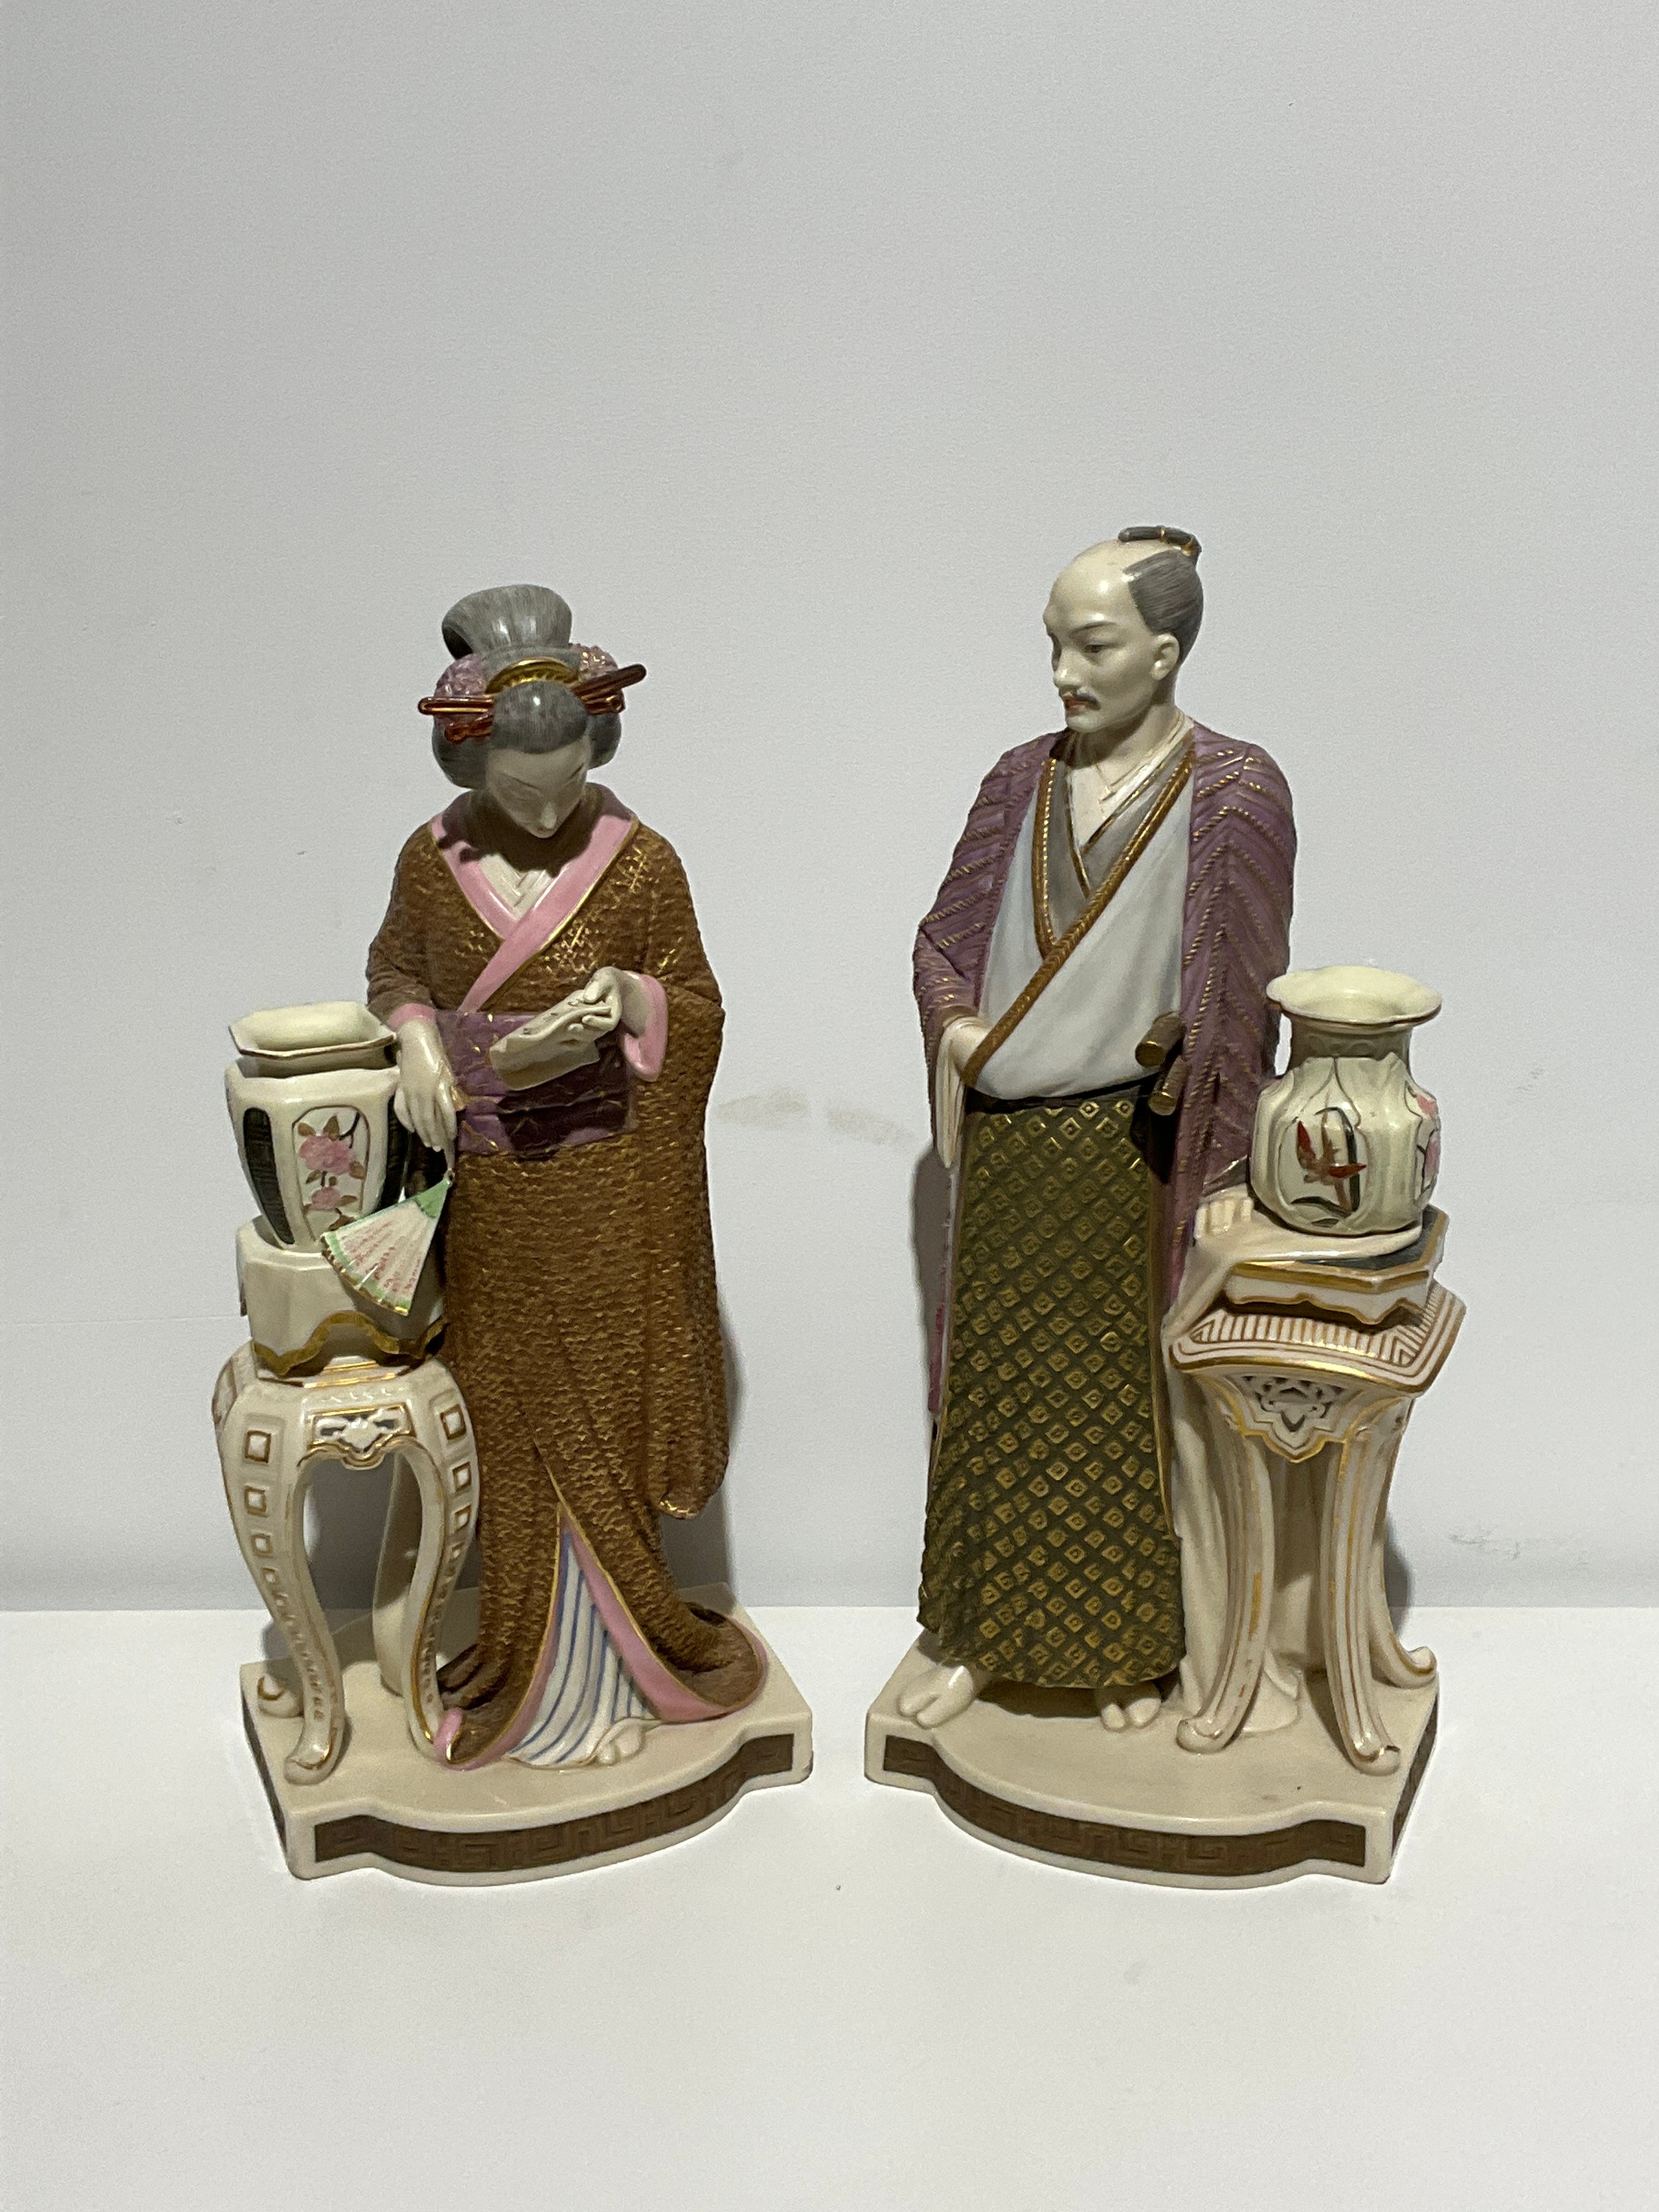 A large pair of Royal Worcester figures - a standing Japanese man and woman, designed by James